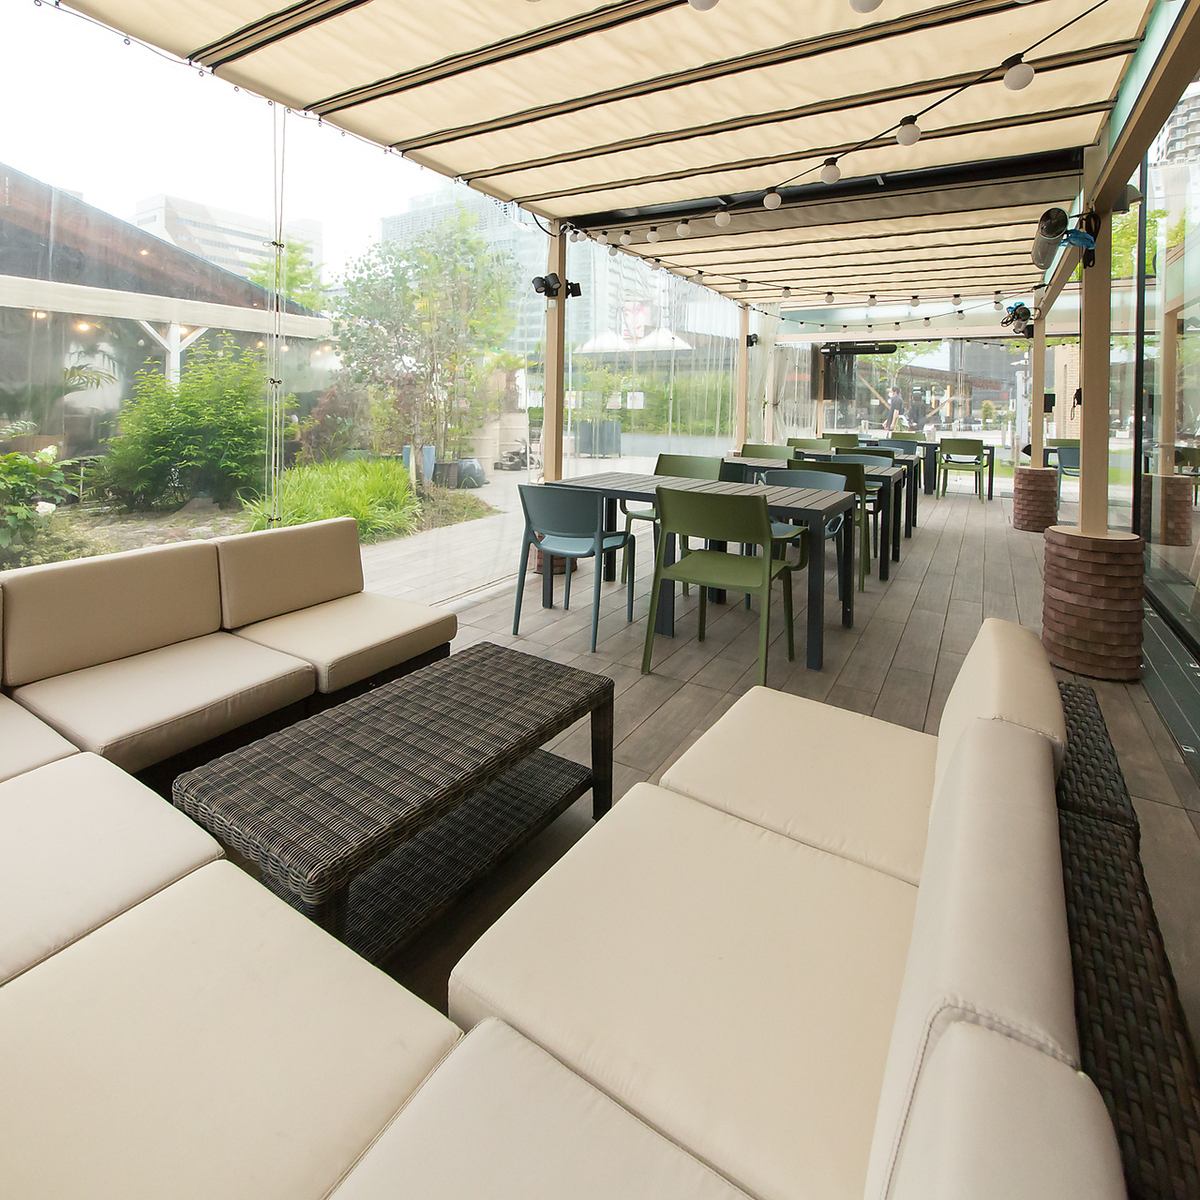 We have 30 terrace seats available!